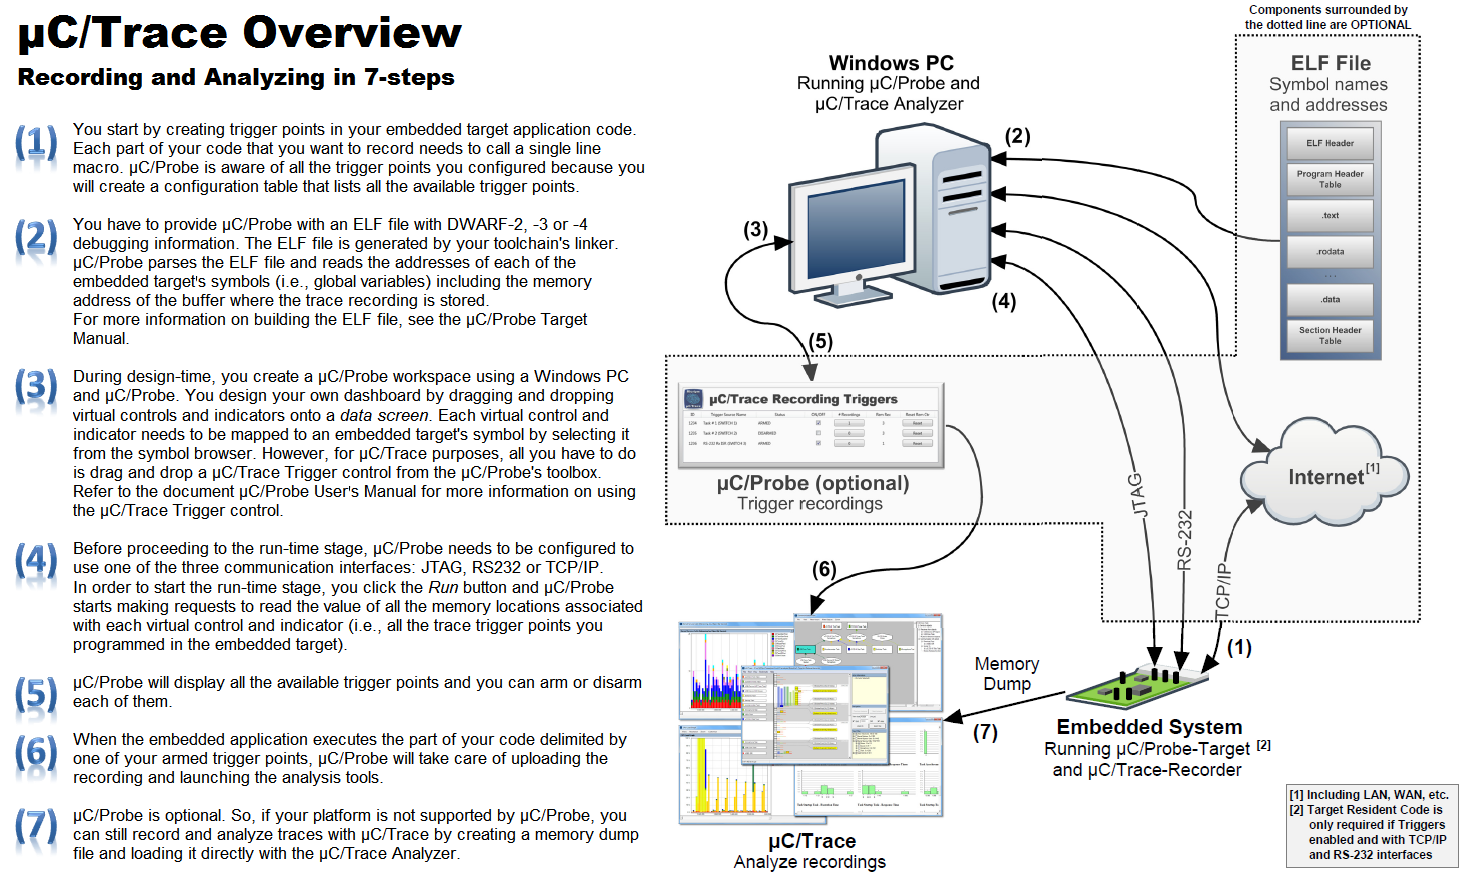 01-uC-Trace-Overview.png